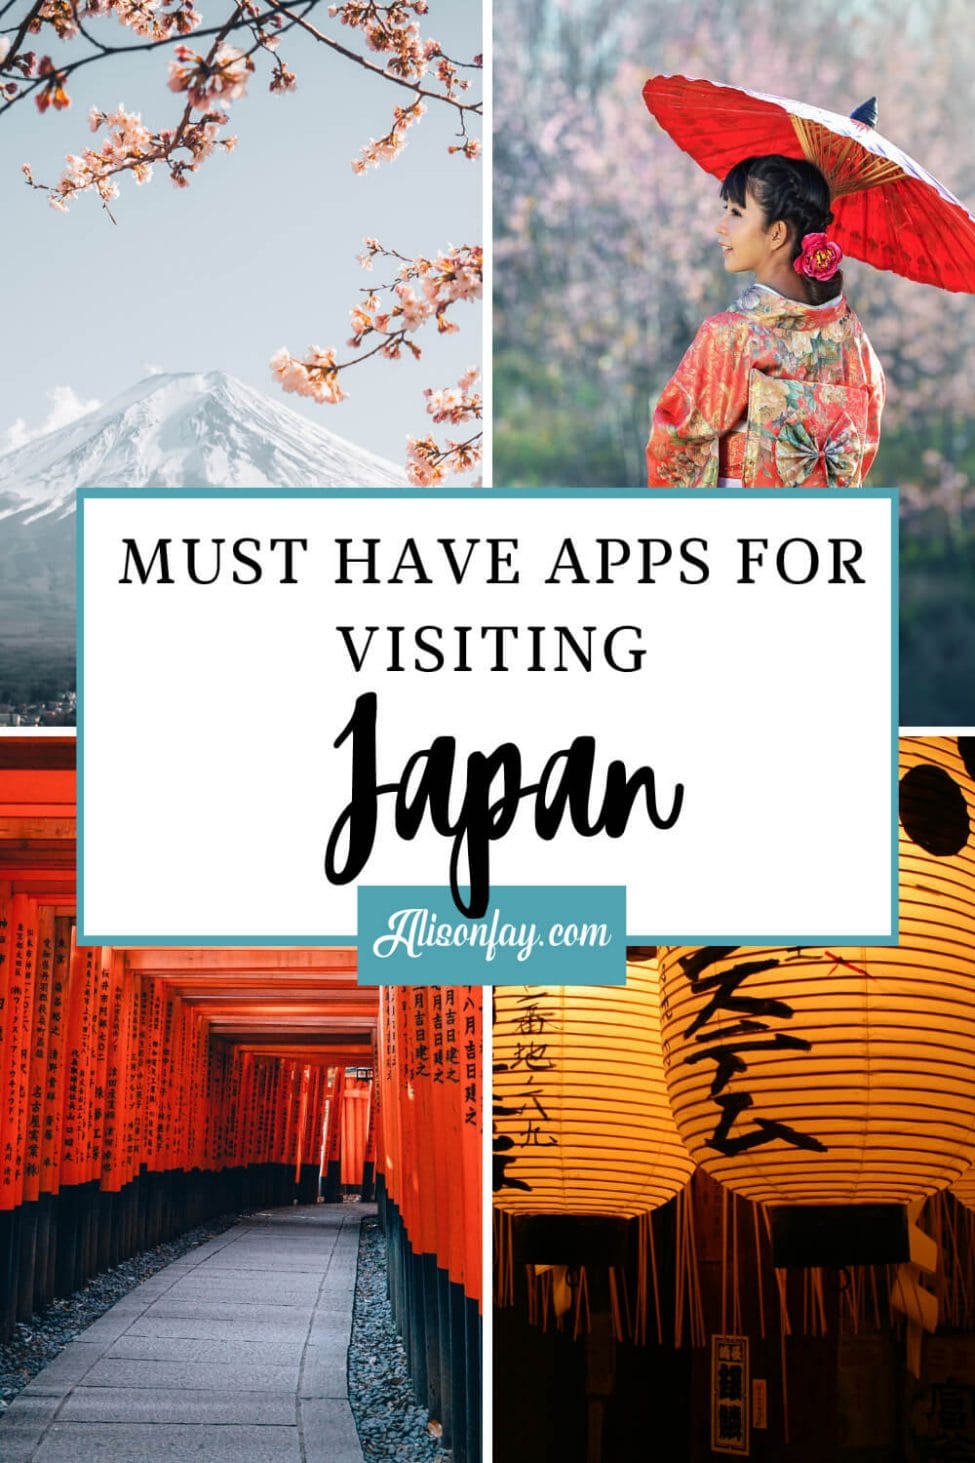 Must have apps for visiting Japan